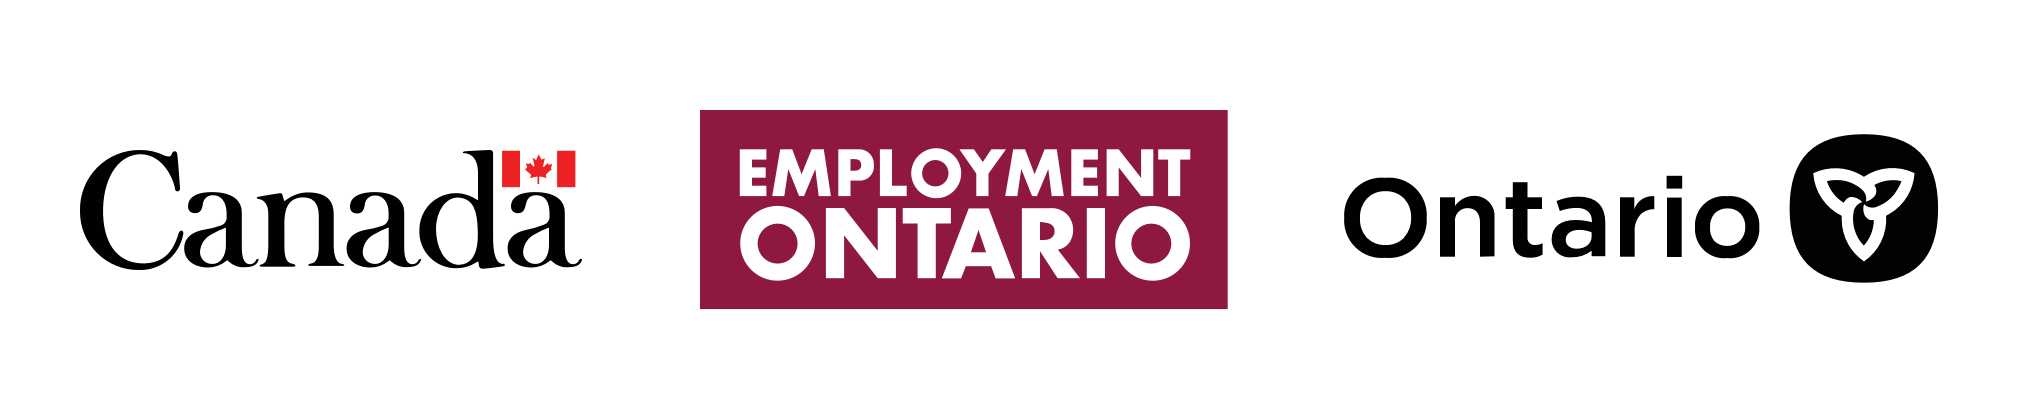 Logos of the Canadian Government, Employment Ontario, and the Ontario Government